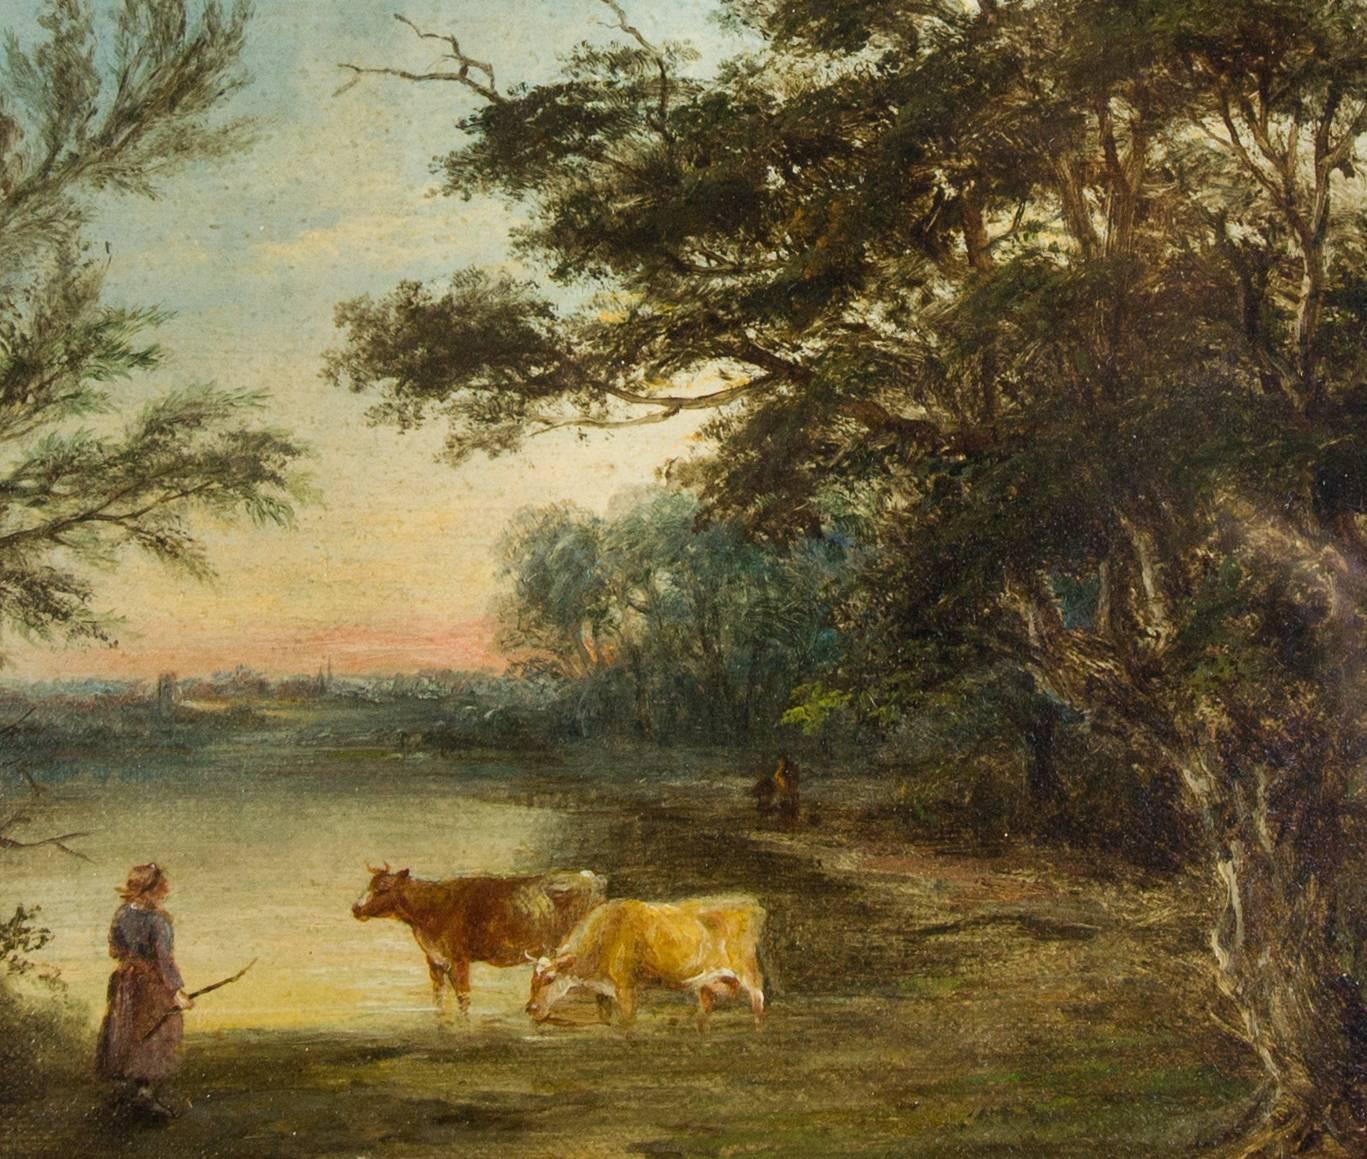 A fine 19th Century oil painting of a woman and her cattle by a lake, in a classical landscape. By the highly regarded Victorian painter Robert Burrows (1810-1883), signed by the artist to the lower centre. Excellently presented in a period gilt